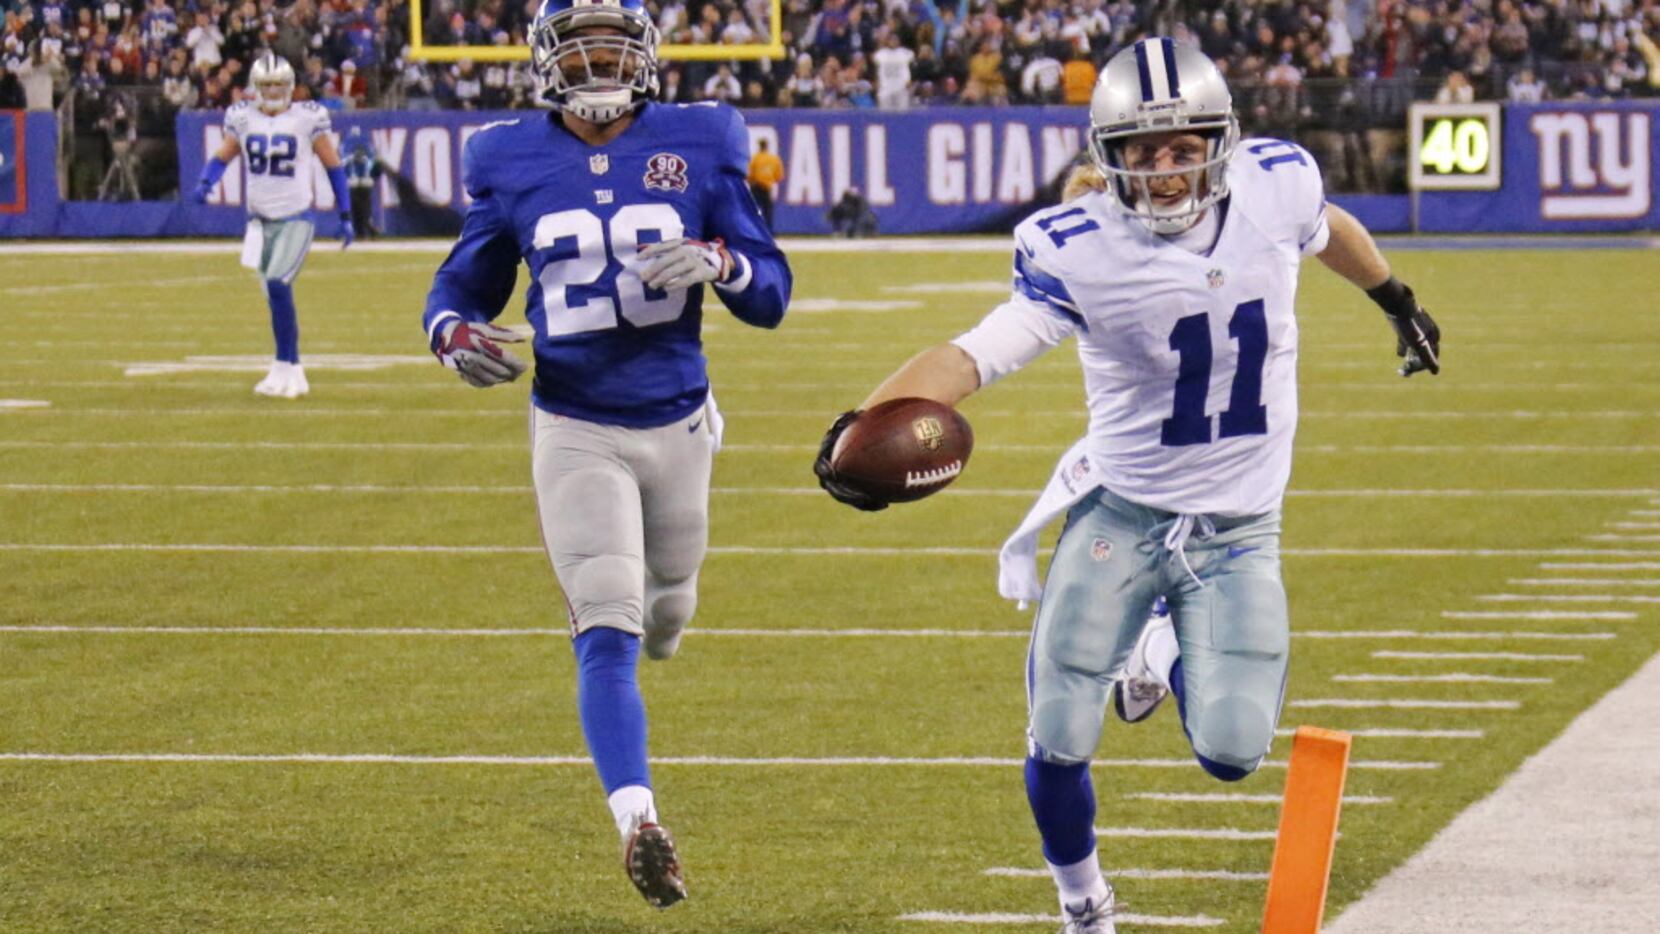 Cole Beasley's sports fantasy? One-on-one with Kobe Bryant